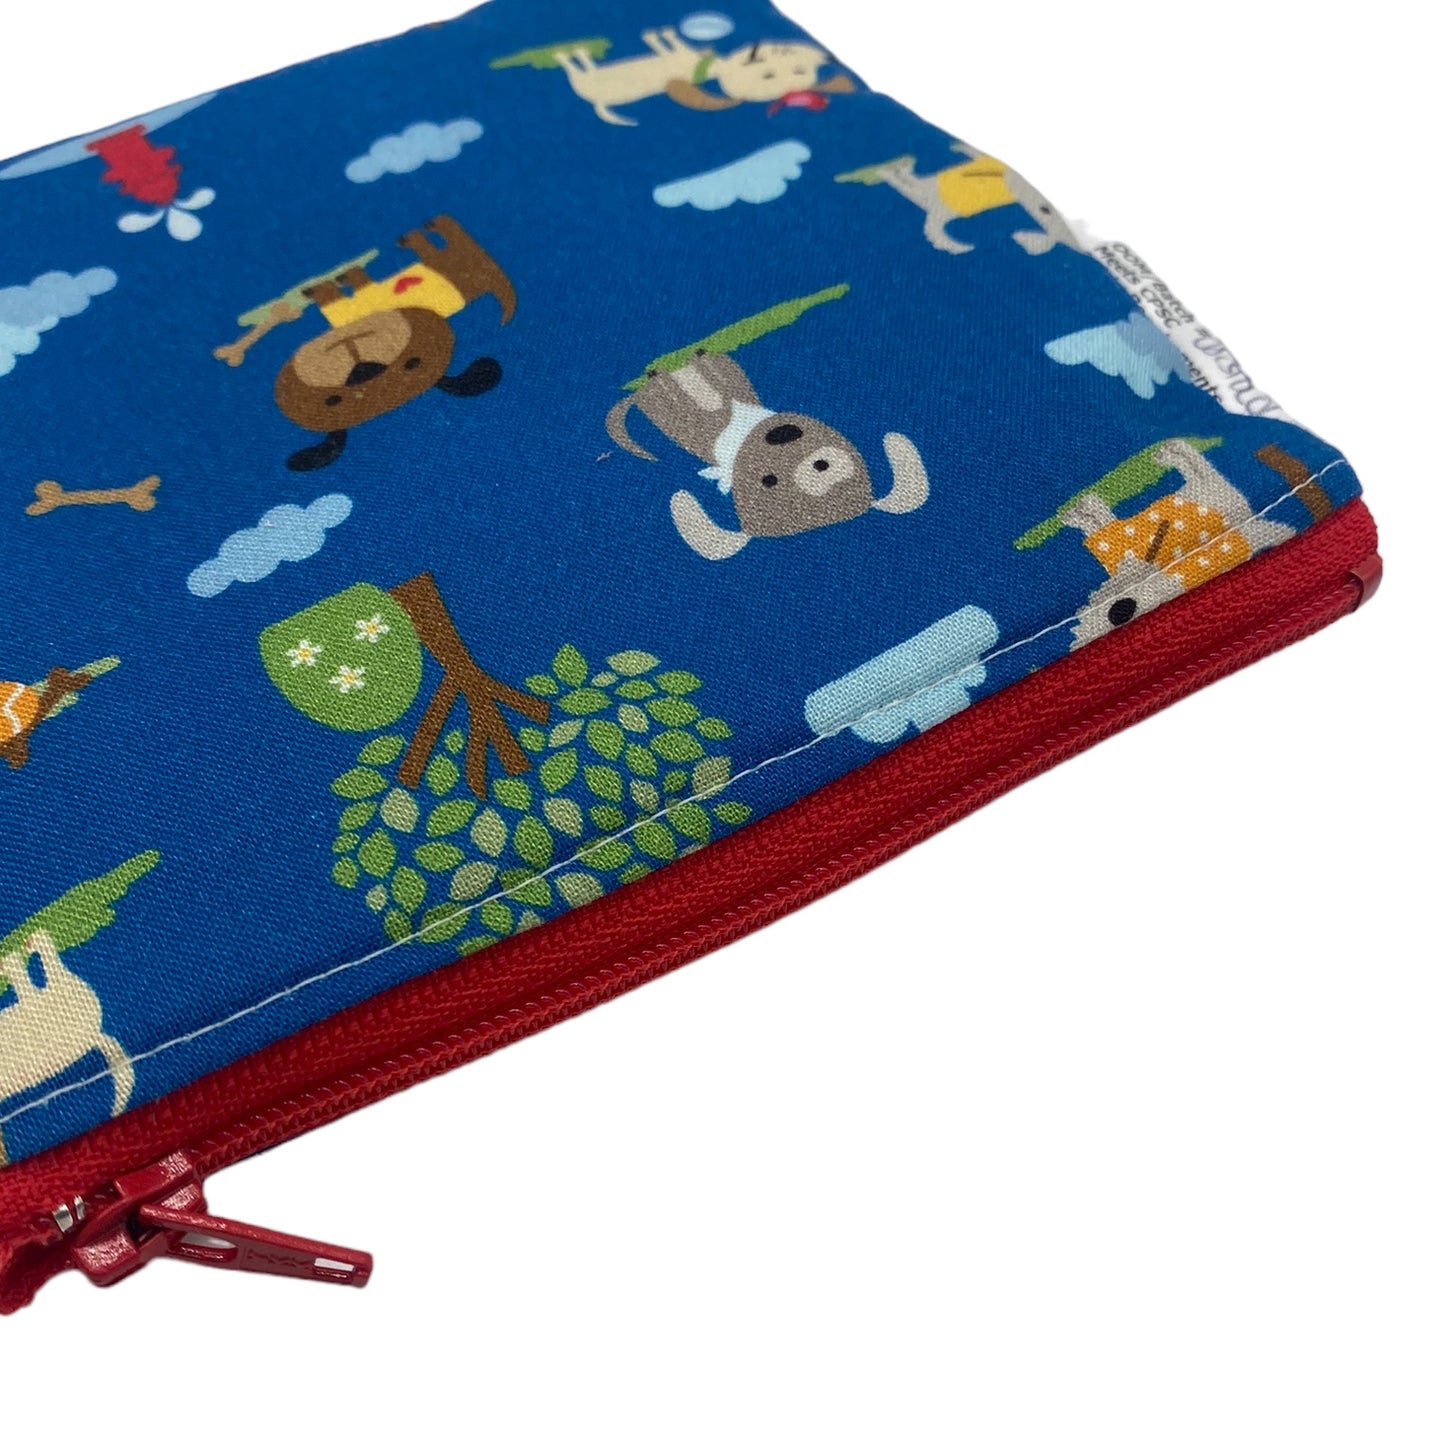 Toddler Sized Reusable Zippered Bag Dogs in Park